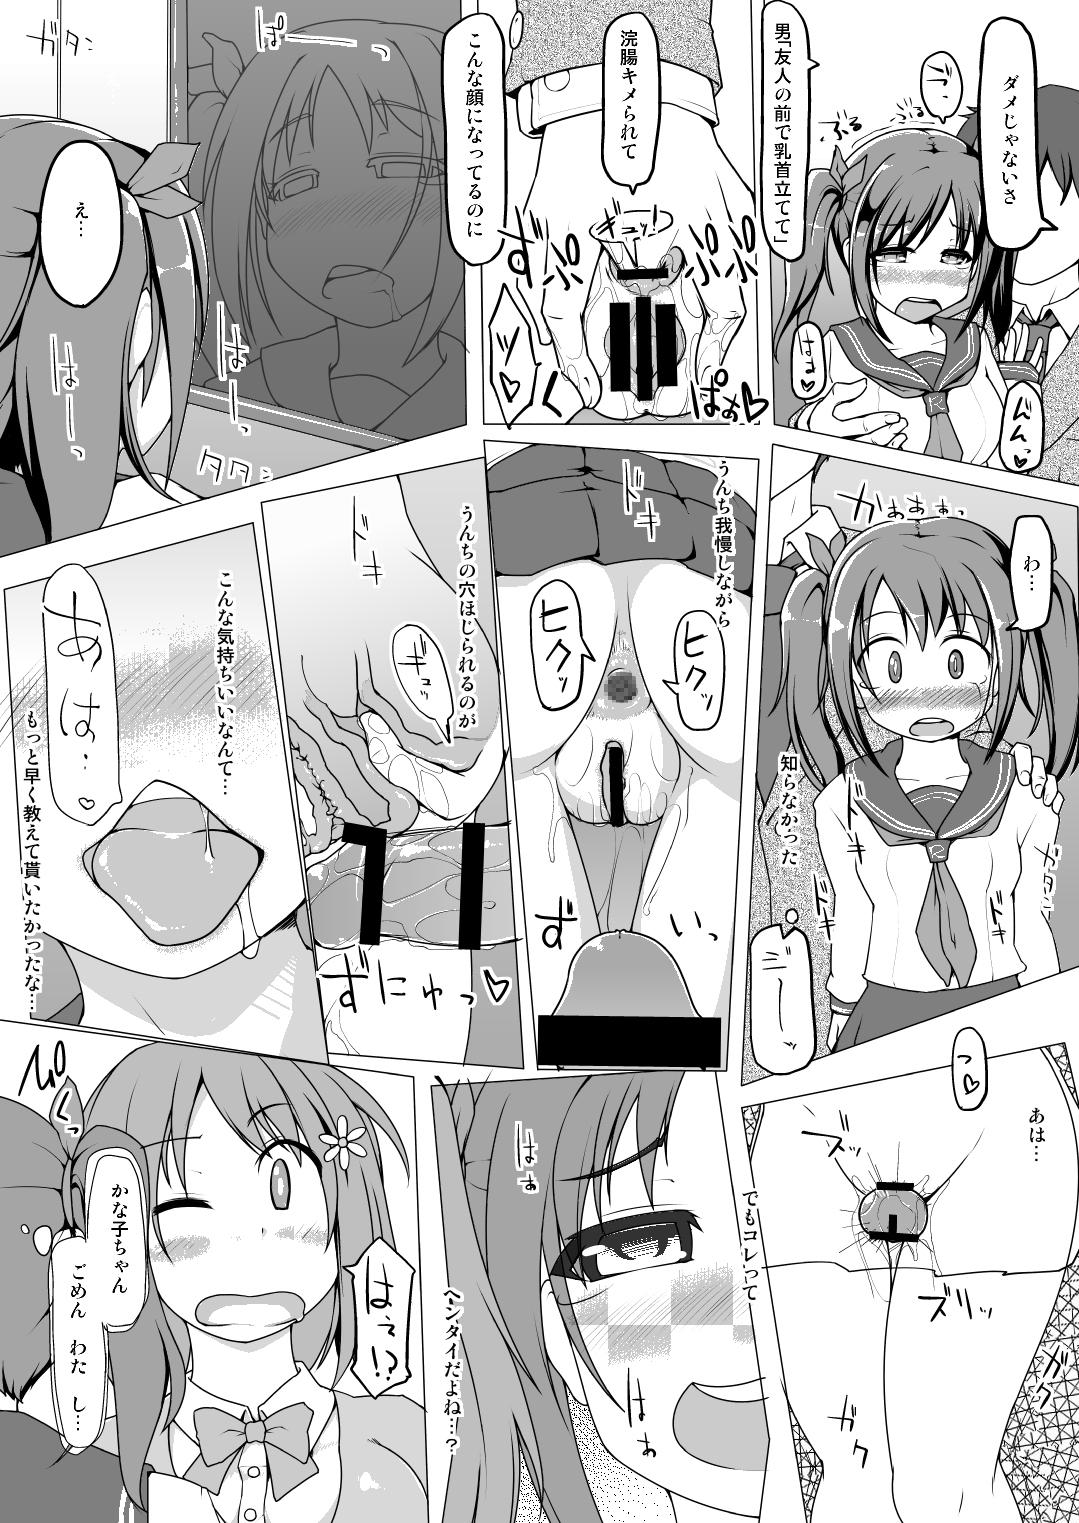 Longhair Table Uniform Type Cute - The idolmaster Panty - Page 10